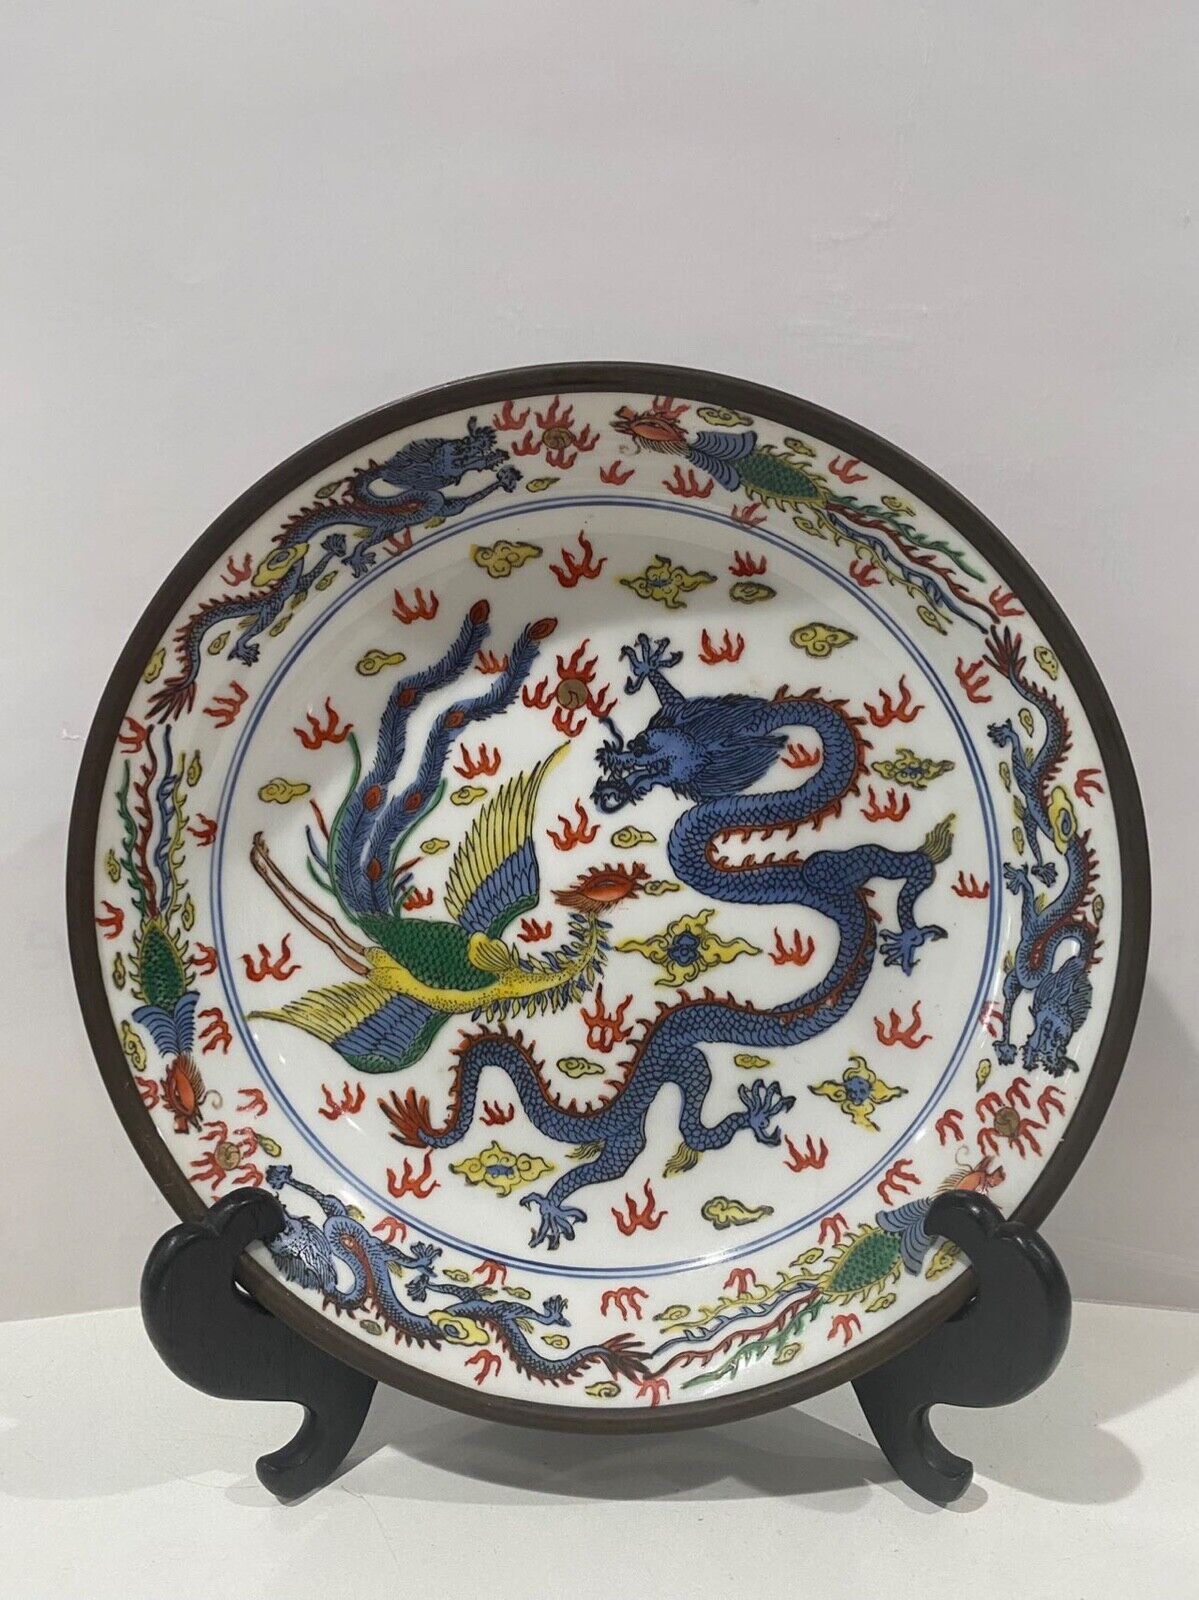 Vintage Hh Japan Hong King Hand Painted Porcelain and Brass Dragon Ashtray Plate